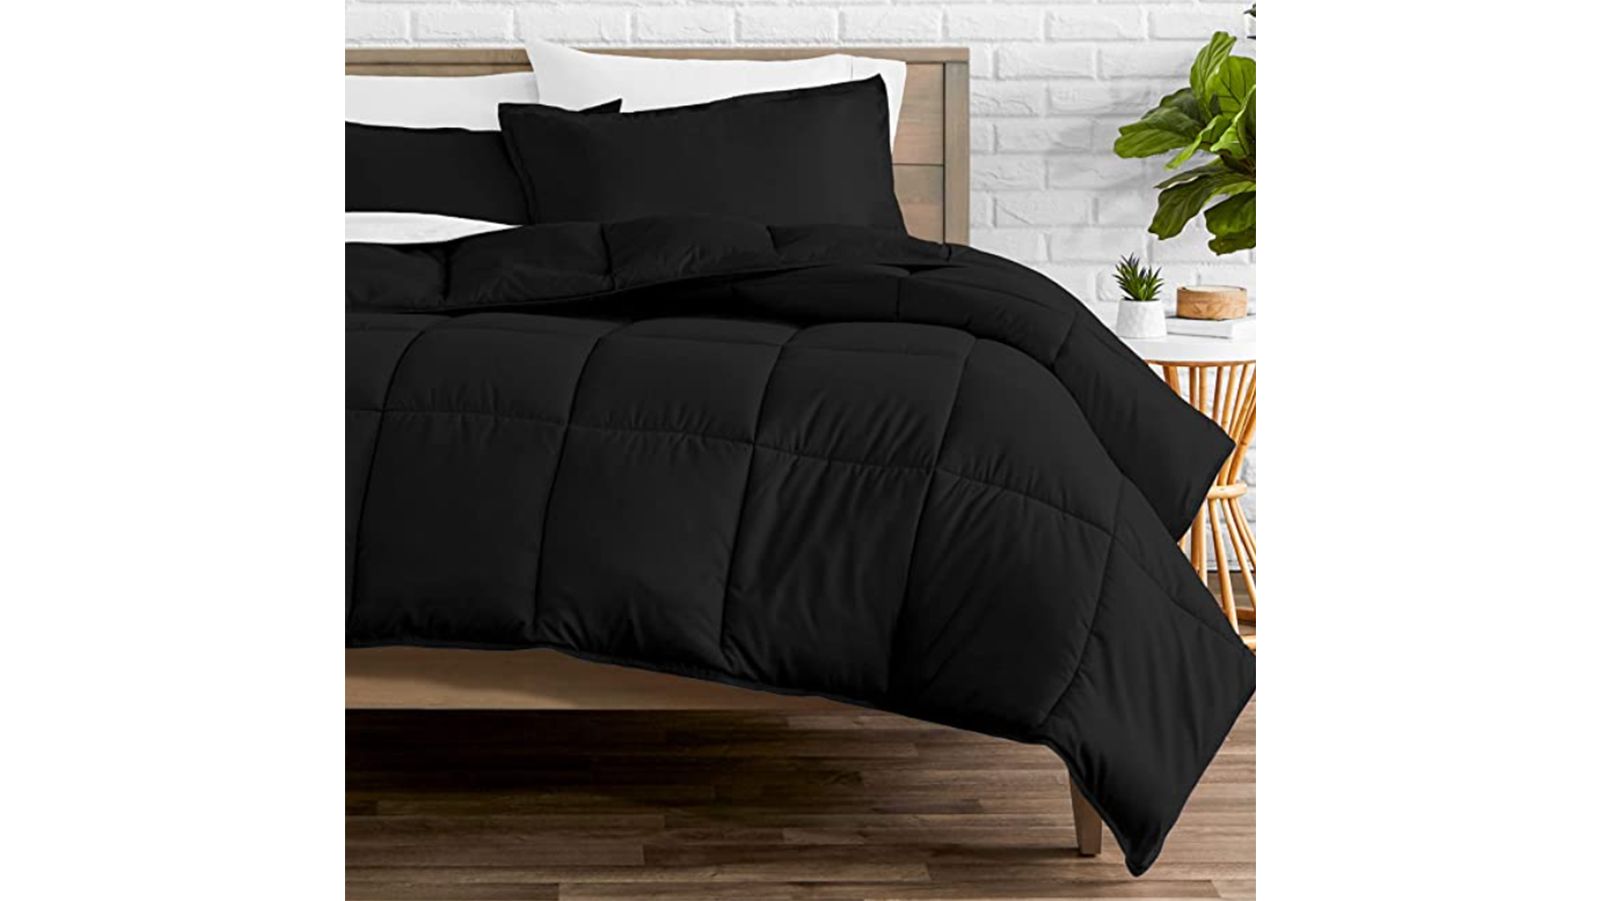 Twin Xl Bedding For Your College Dorm, Twin Xl Bed Sets Dorm